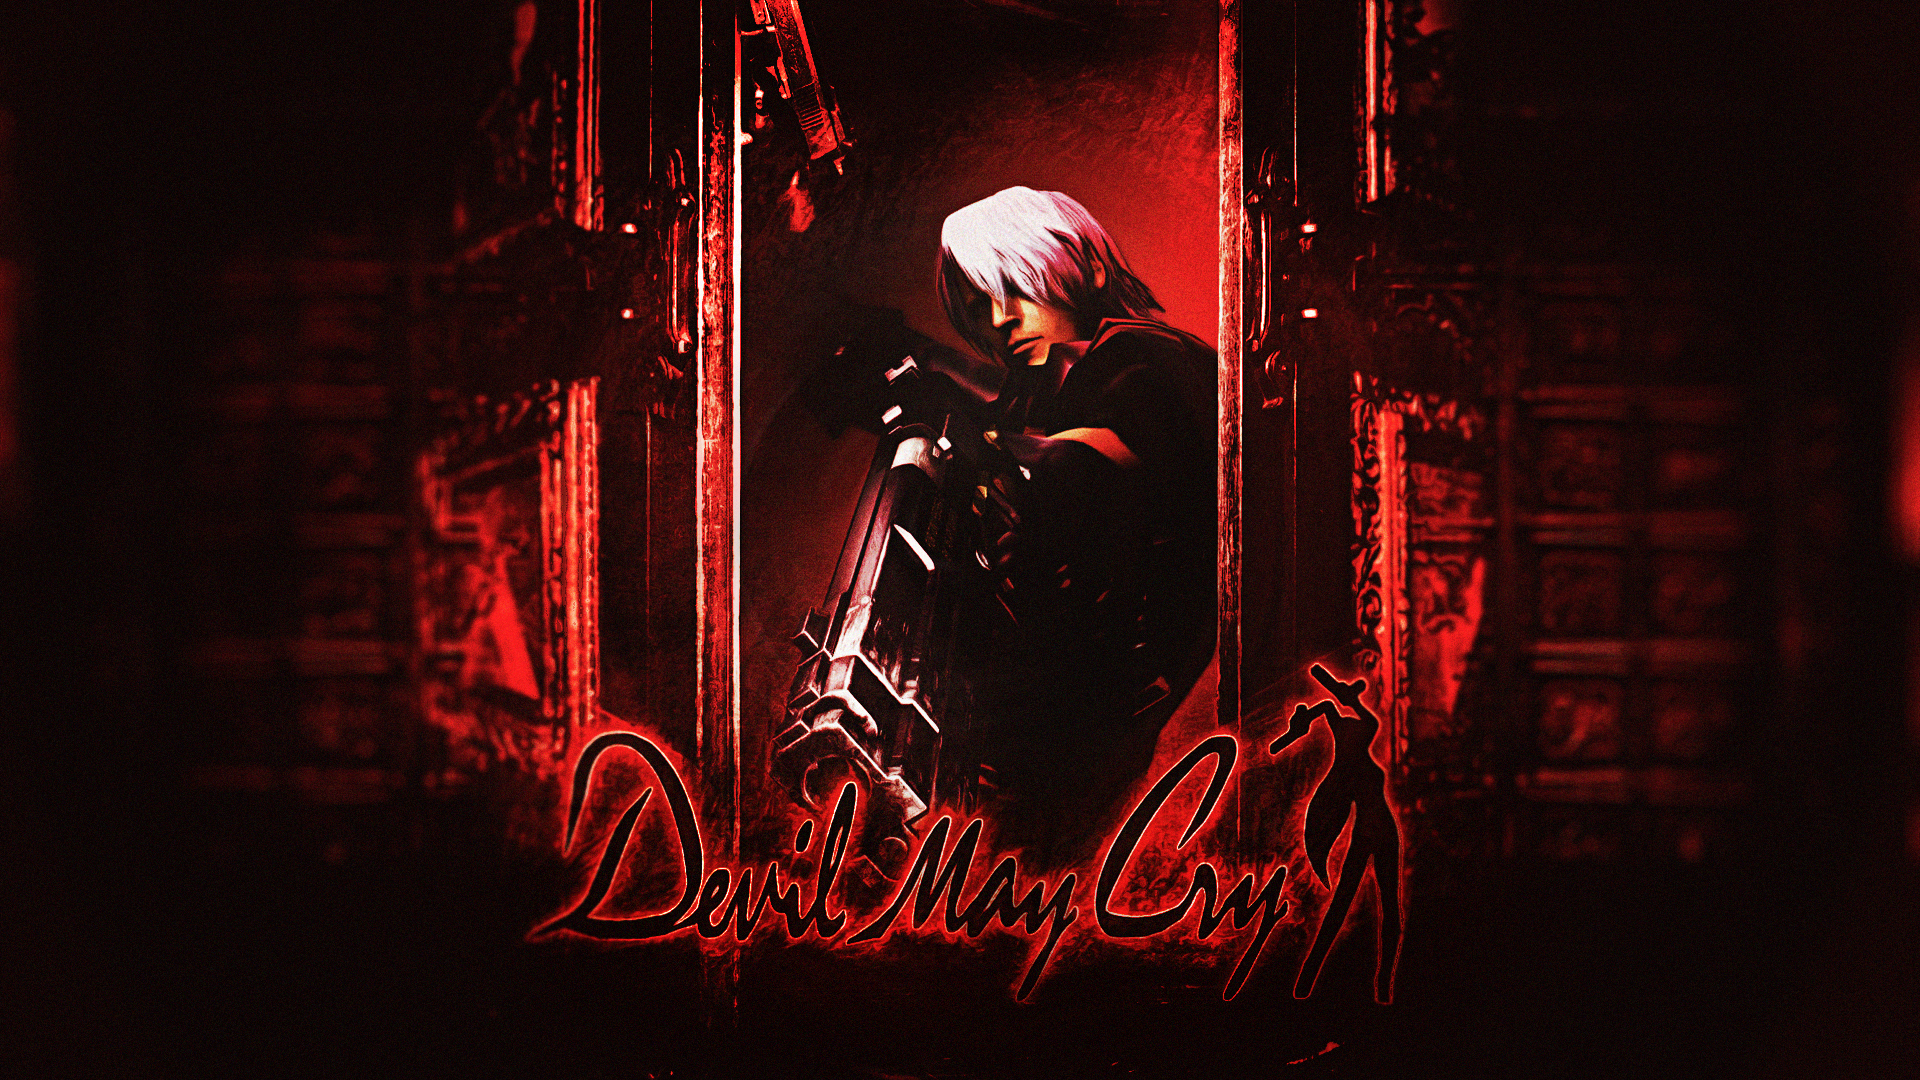 Dante Devil May Cry Devil May Cry Red Video Game Boys Ebony And Ivory Devil May Cry Video Game Chara 1920x1080